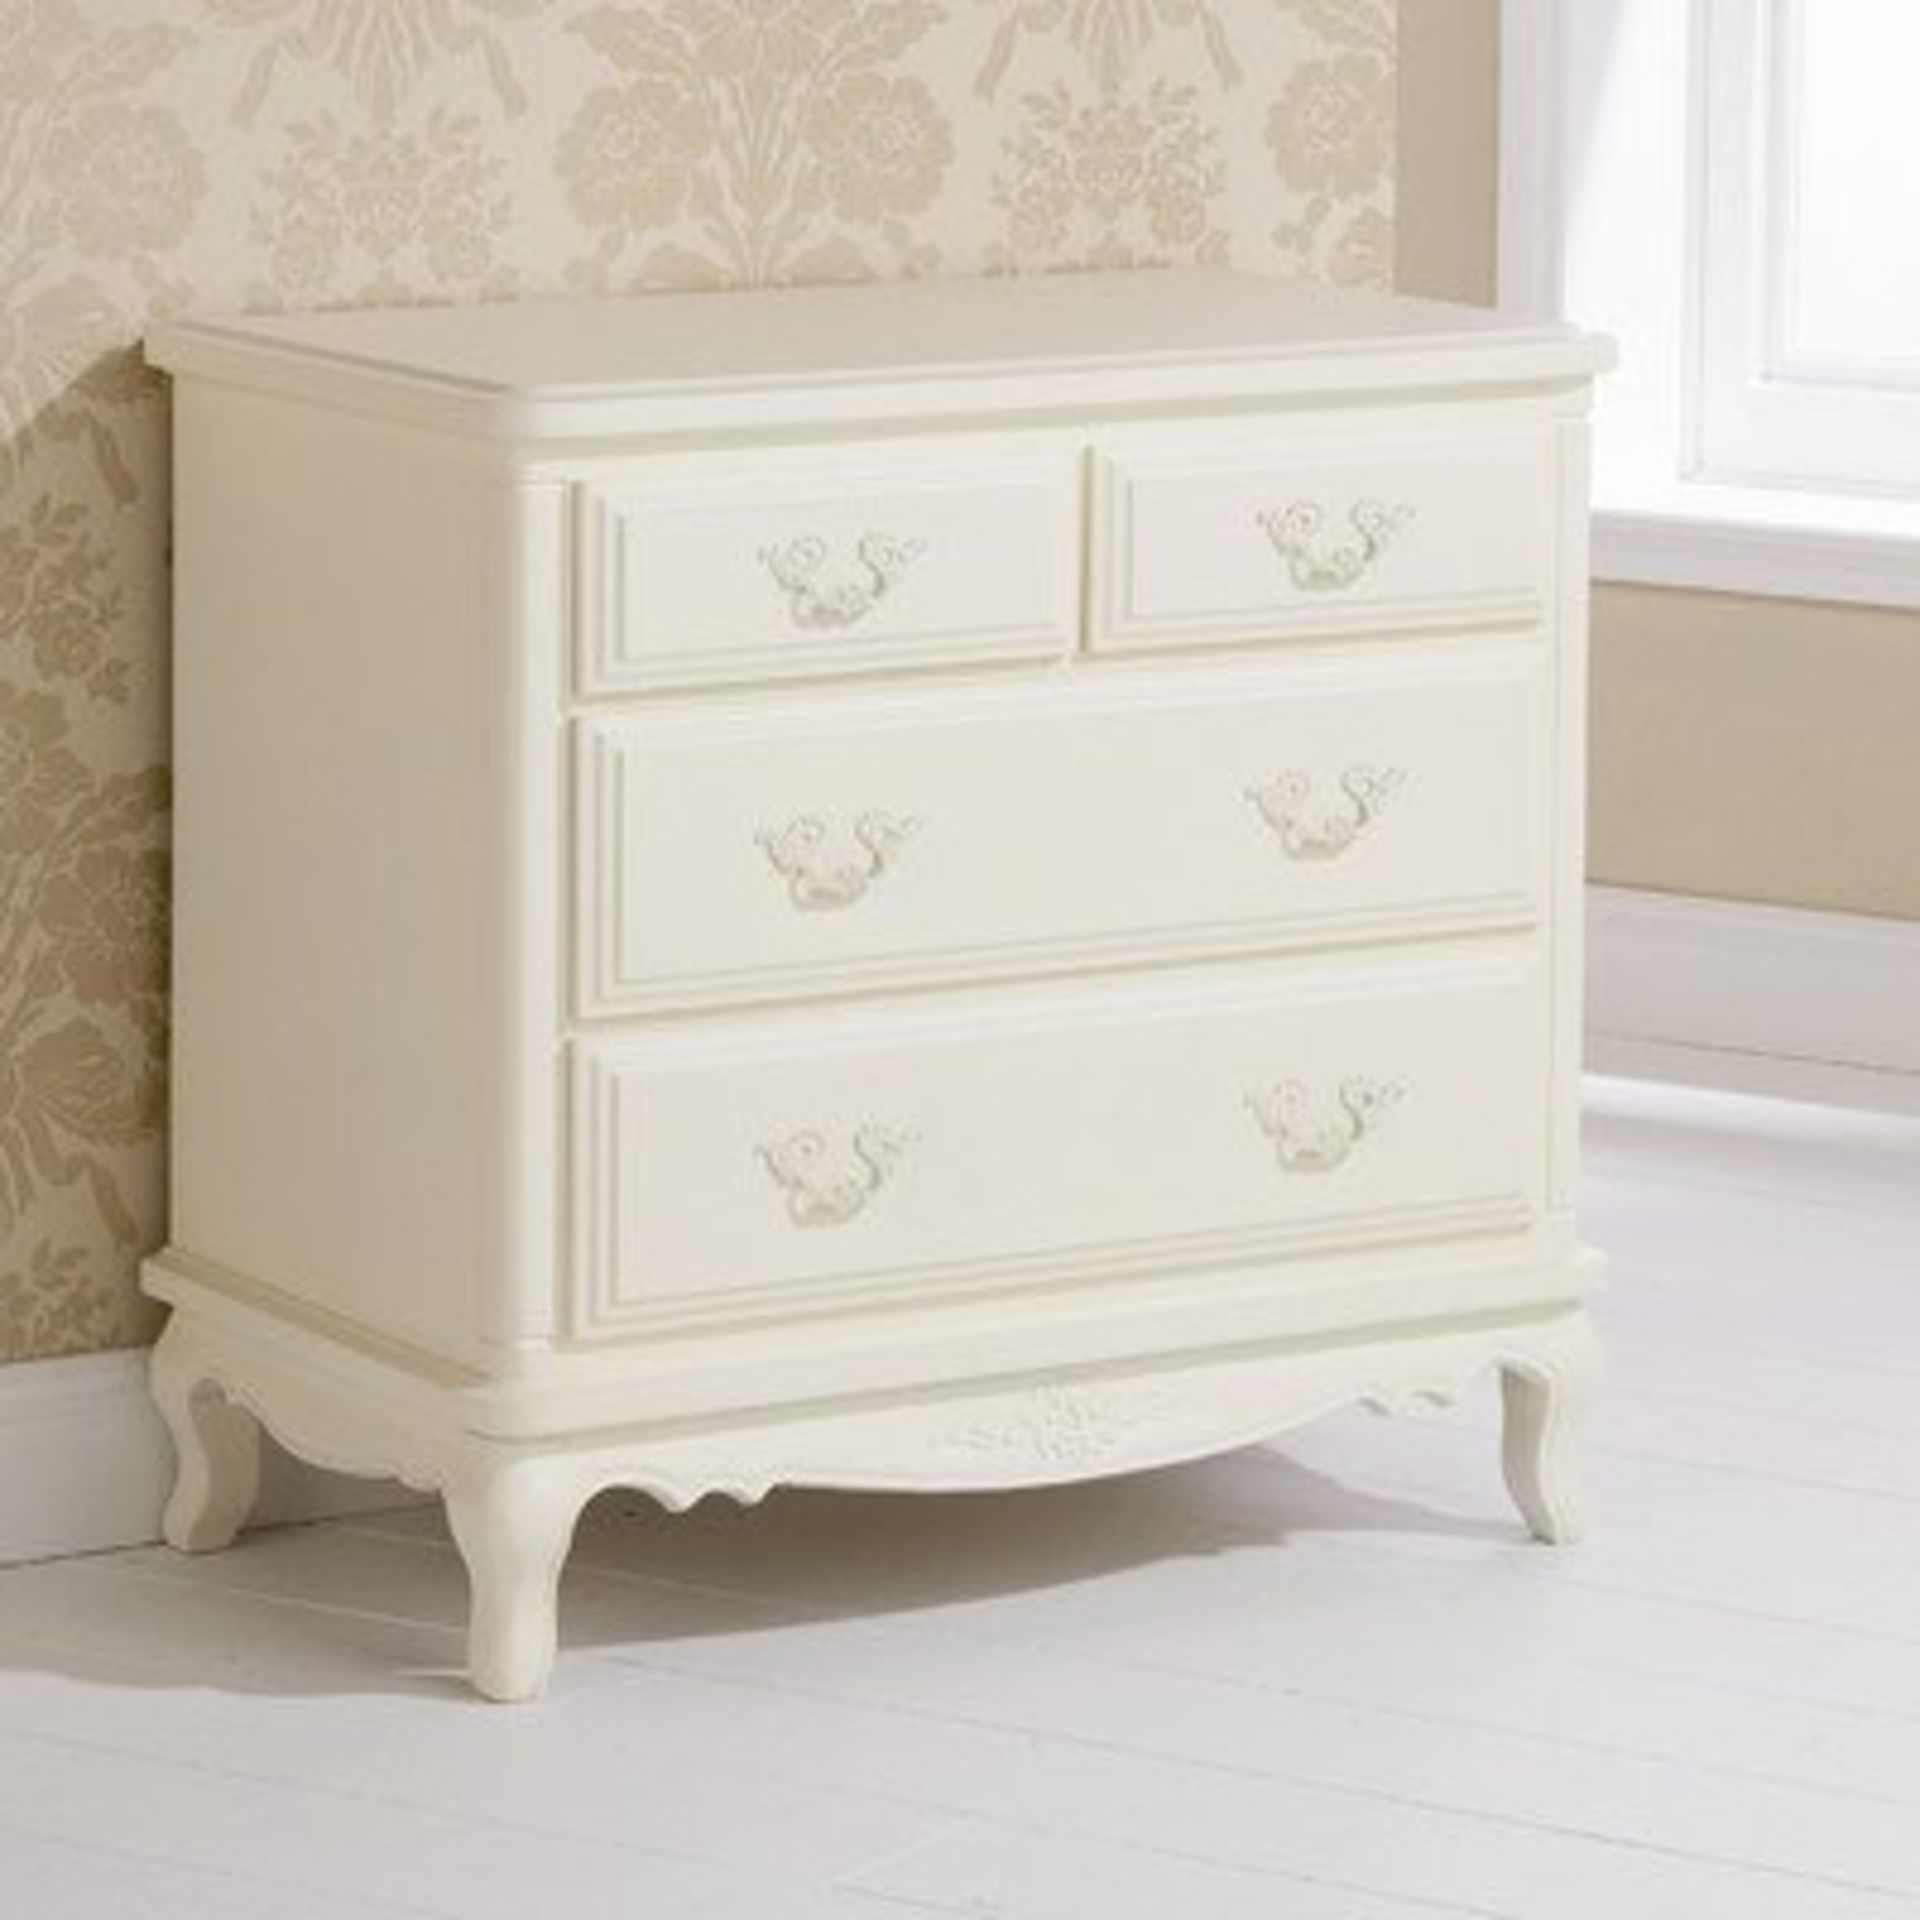 Mountrose 2 + 2 drawer chest in ivory 1 of 1